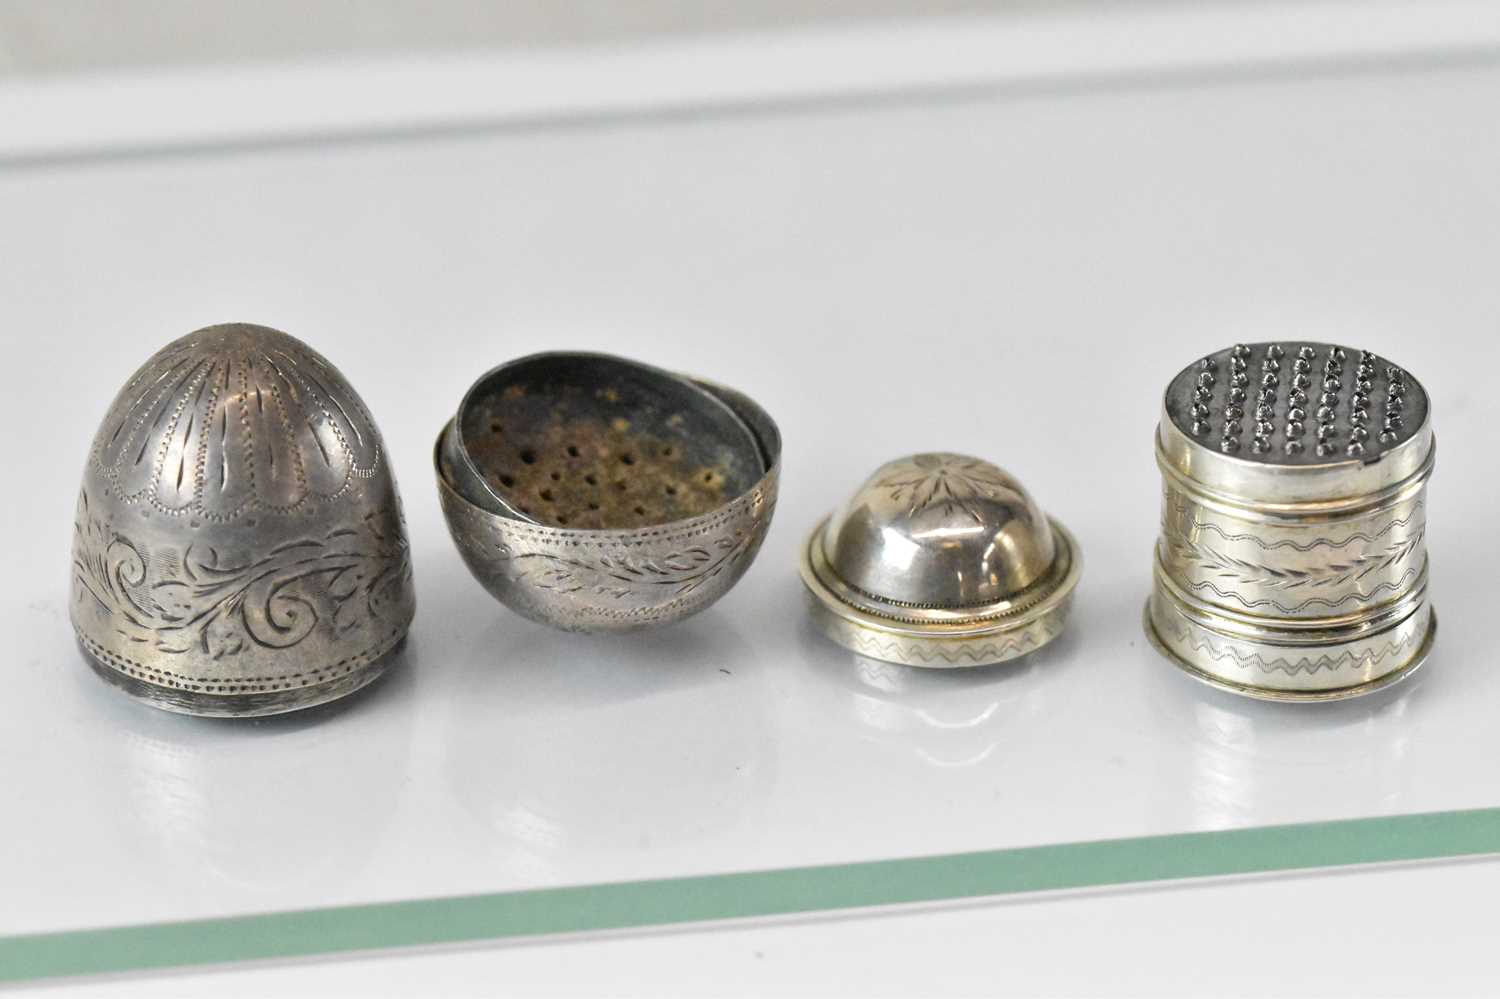 THOMAS WILLMORE; a George III hallmarked silver nutmeg grater of circular form, Birmingham 1800, - Image 2 of 2